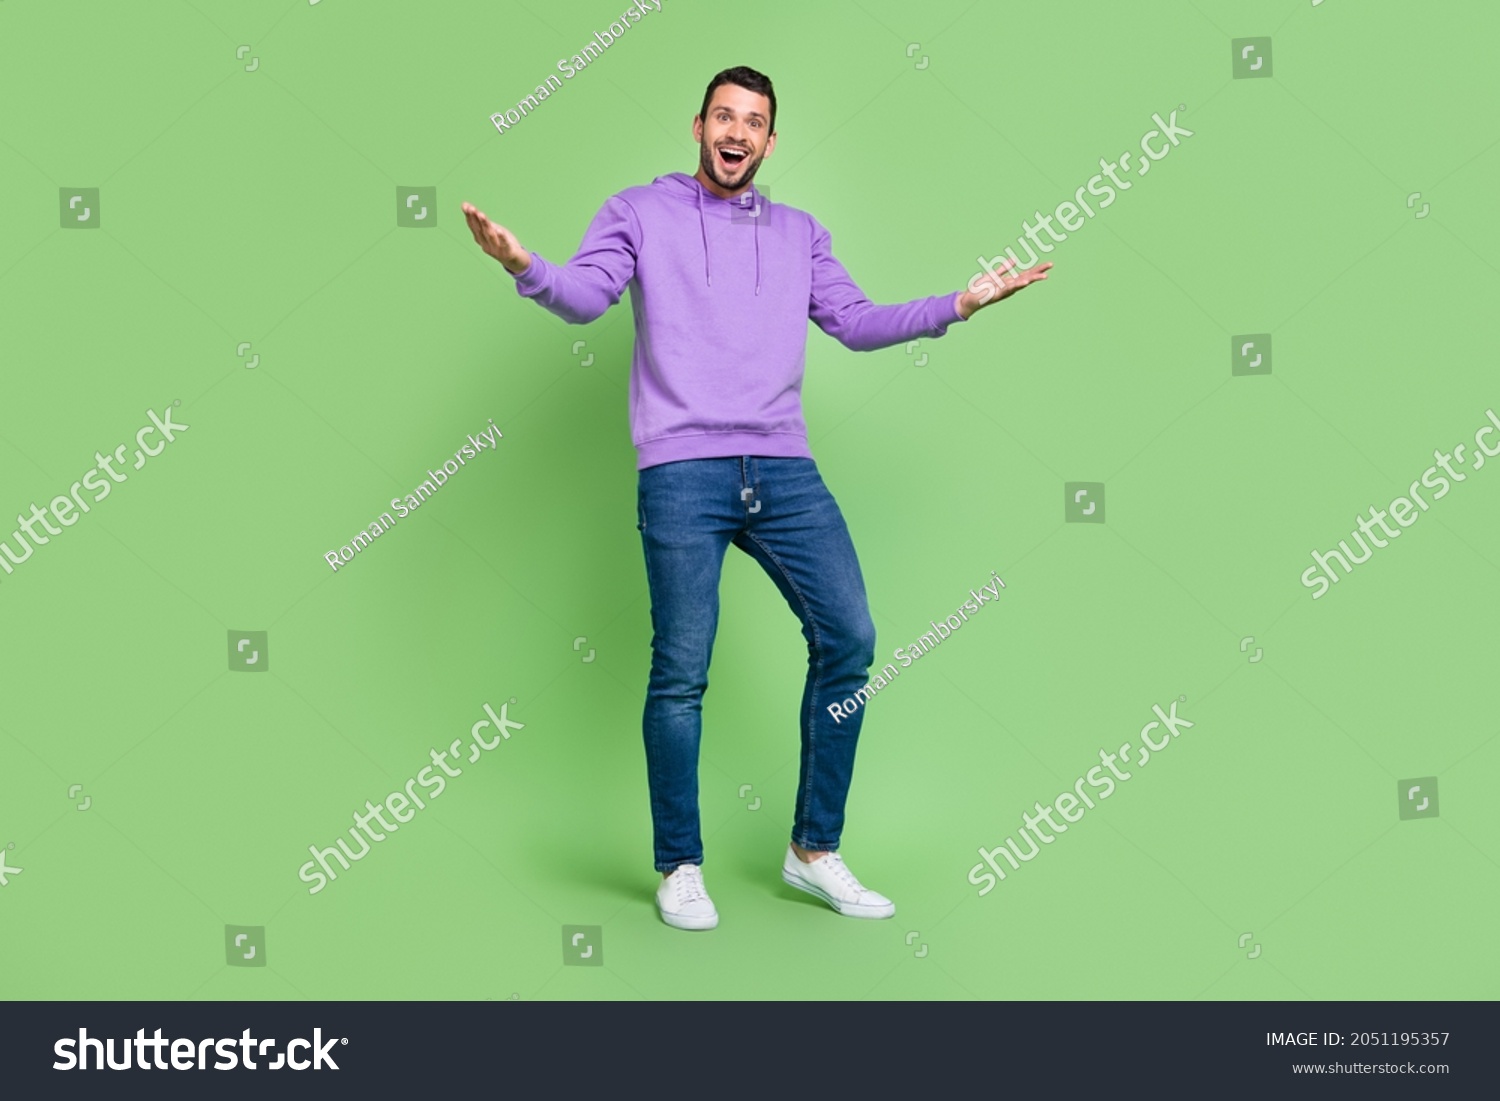 Full Body Photo Young Excited Man Stock Photo 2051195357 | Shutterstock